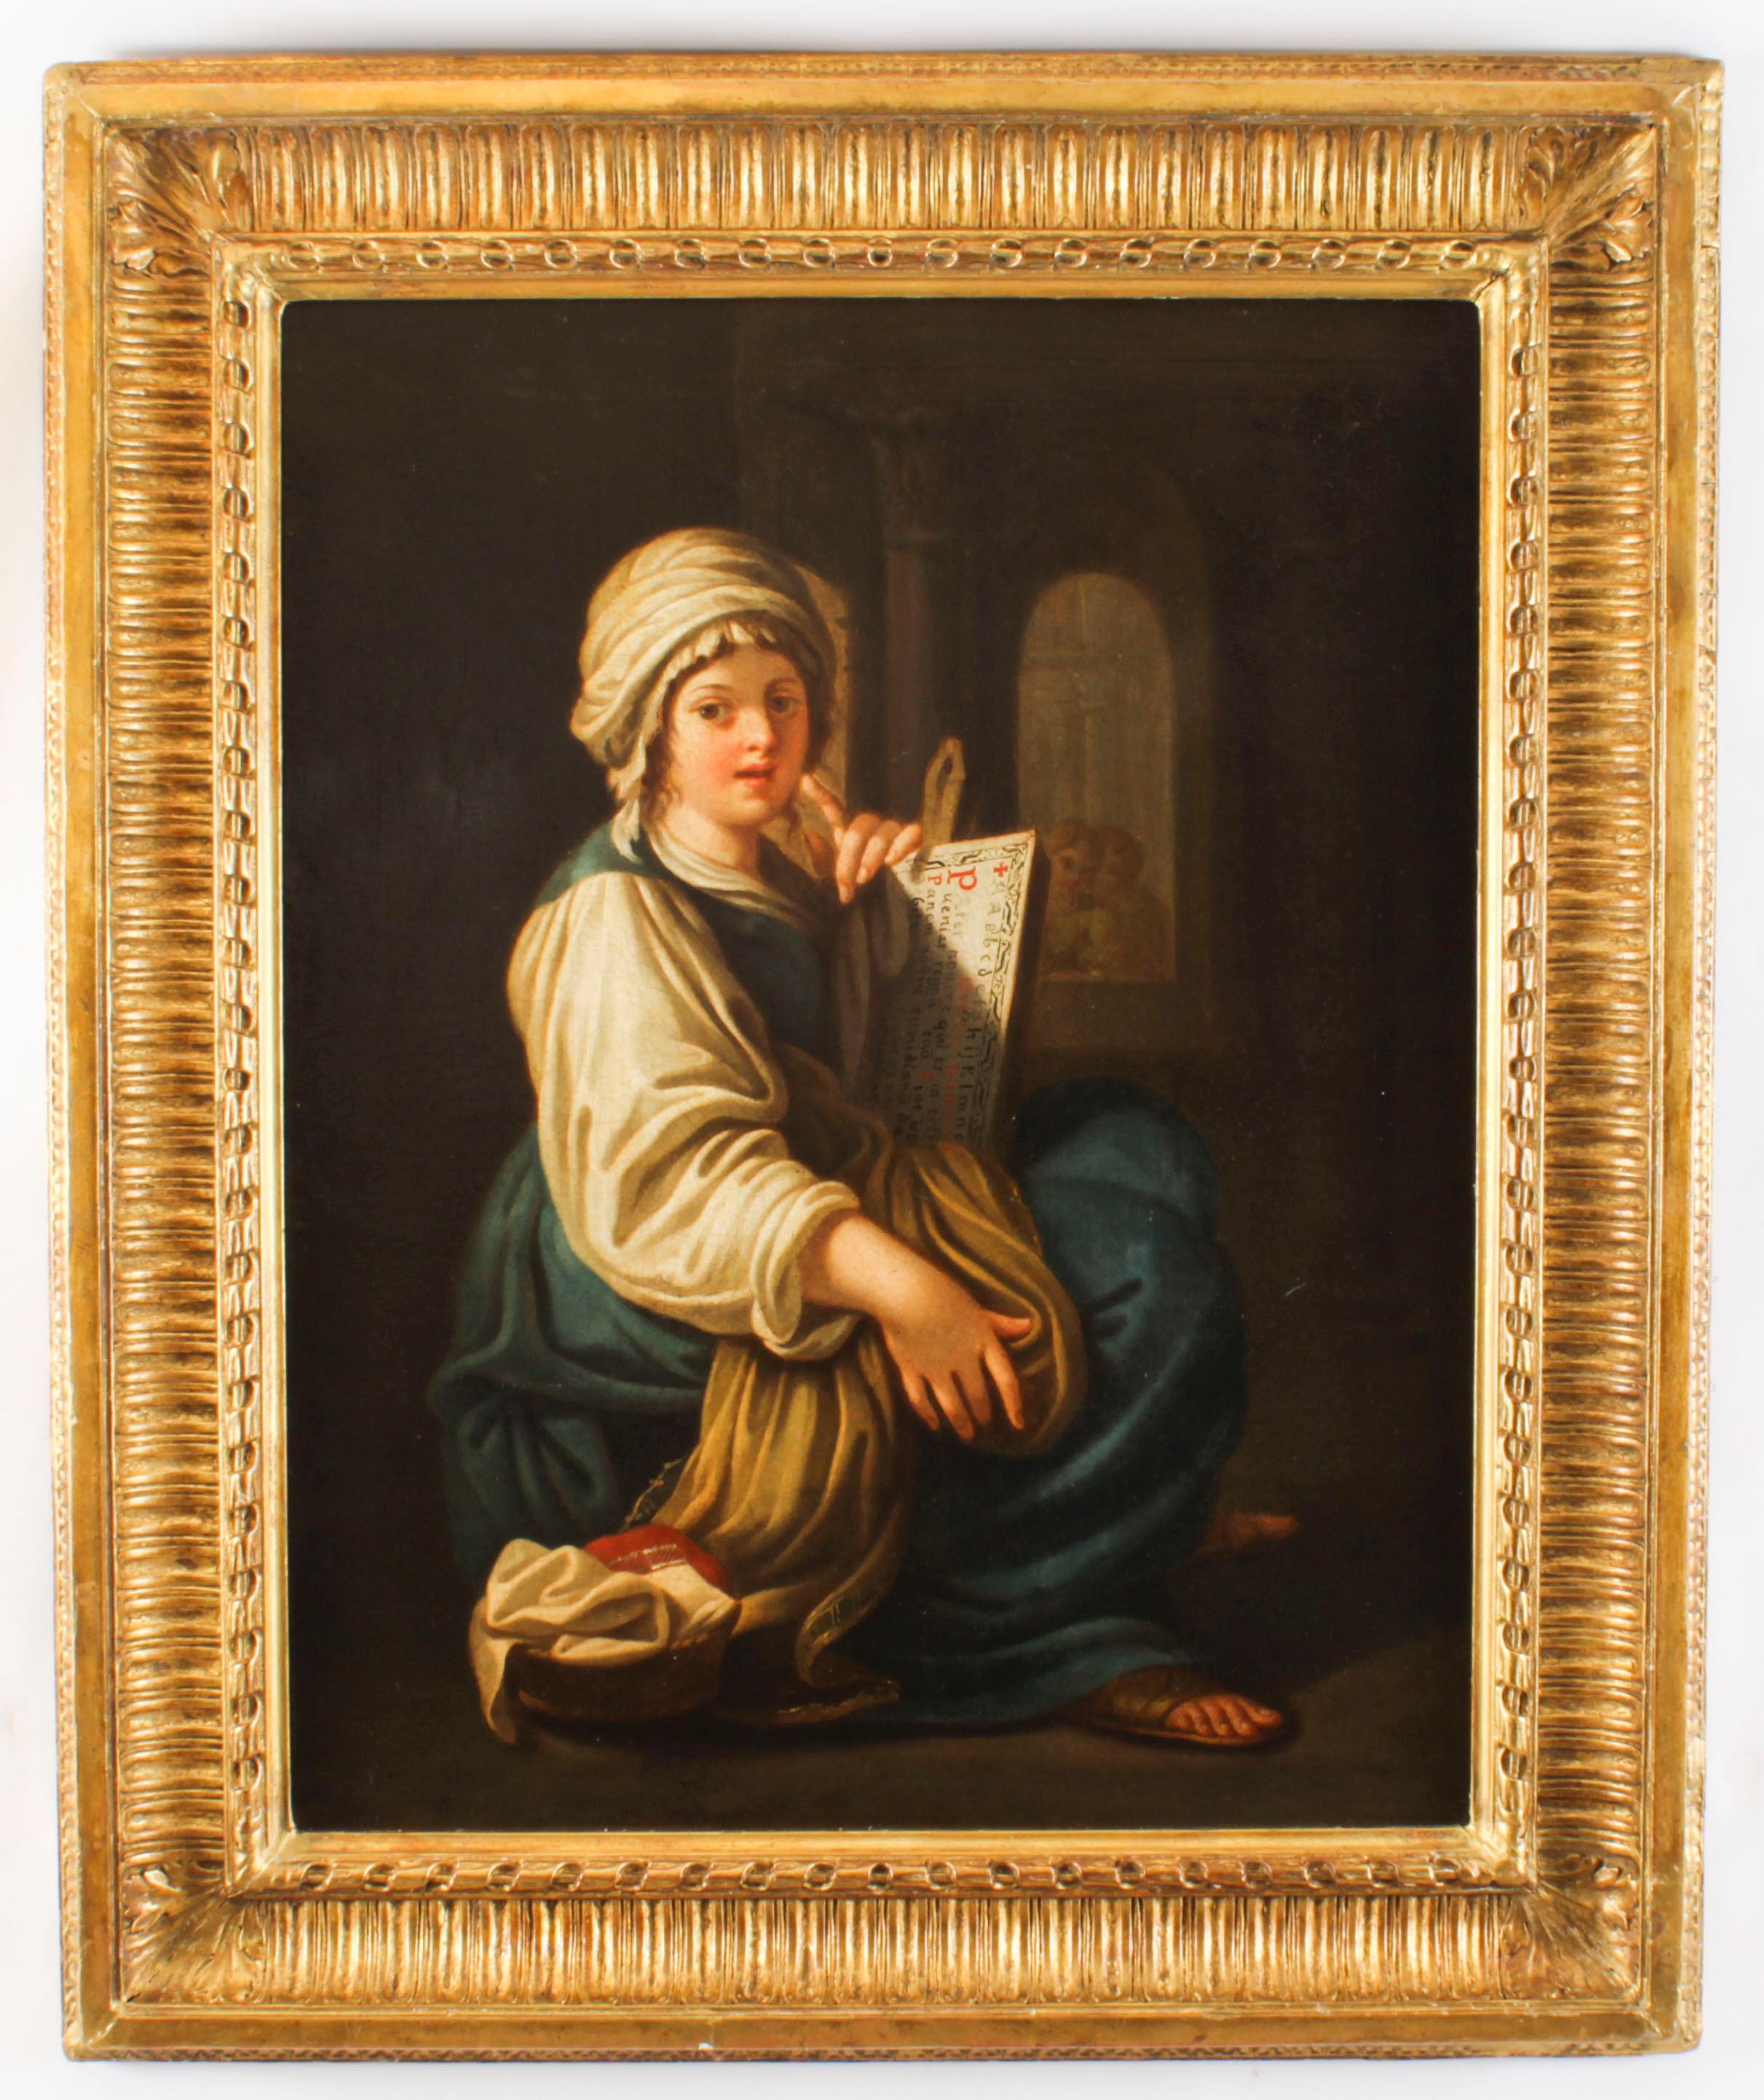 This is a magnificent antique Italian School, 19th Century, oil on canvas painting of a young lady reading a scroll,mid 19th century in date.

This stunning painting features the bust-length portrait of a beautiful young woman, wearing blue and